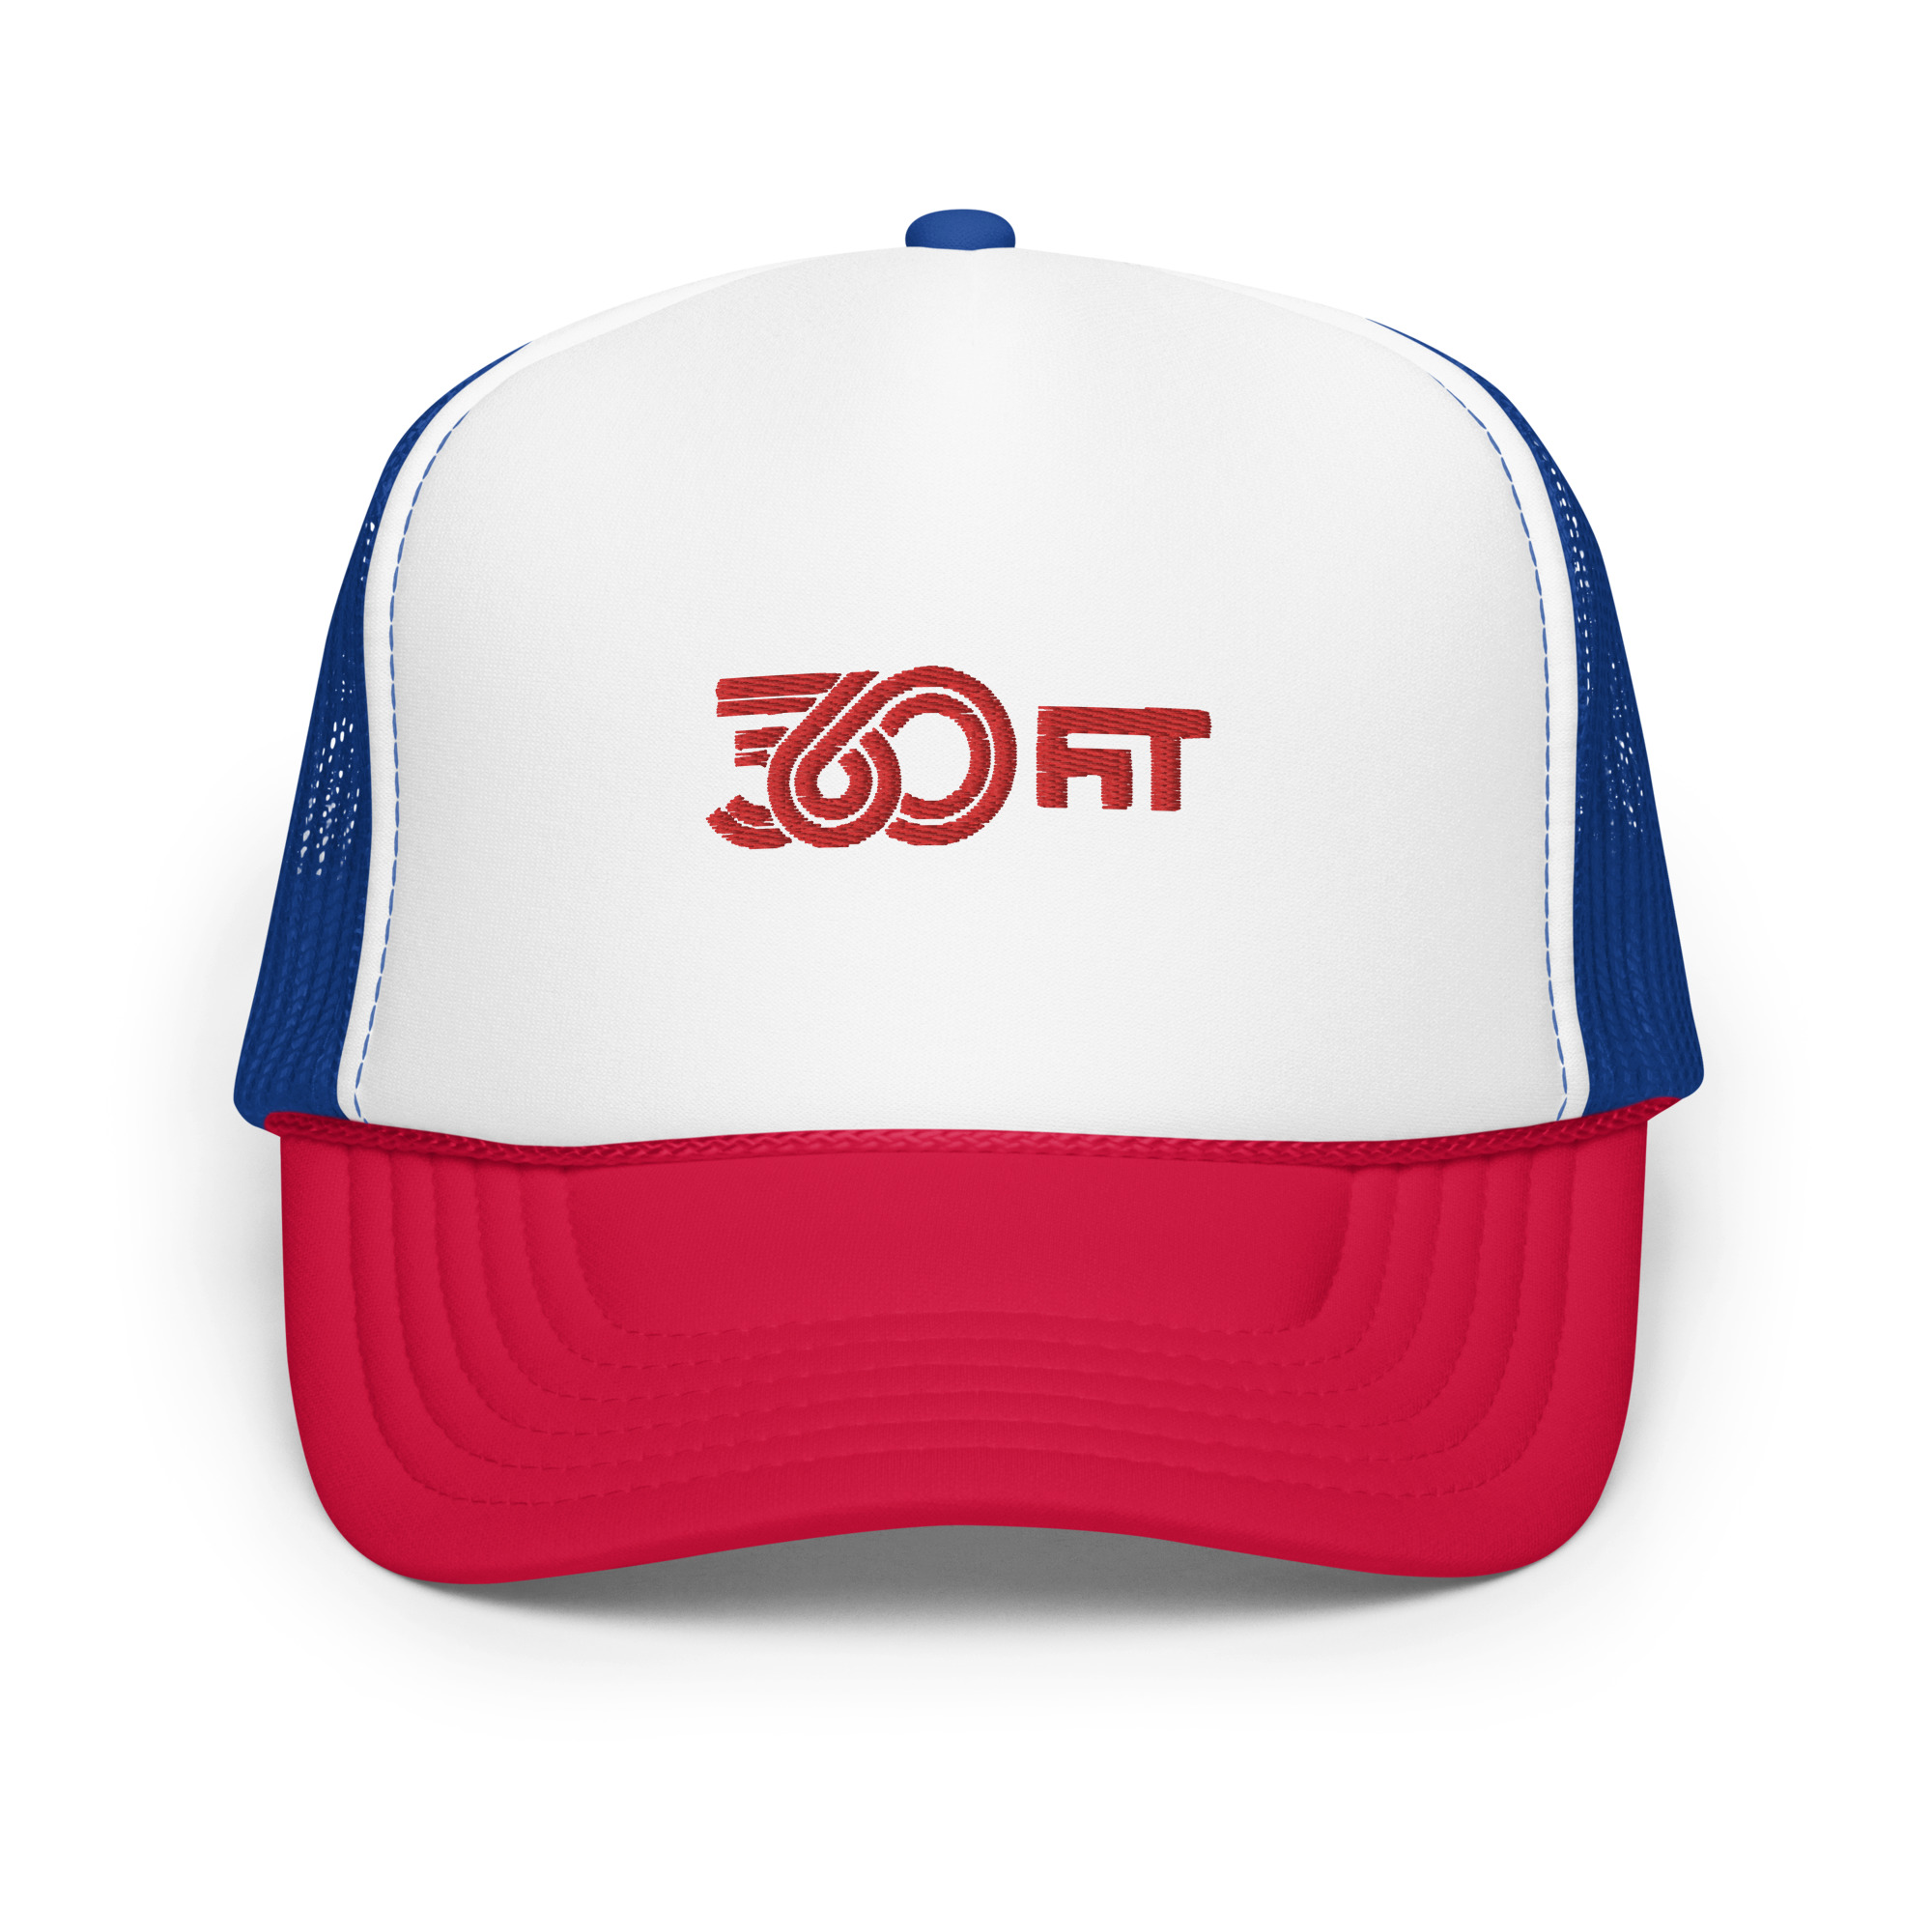 foam-trucker-hat-white-royal-red-one-size-front-64b6d044c3972